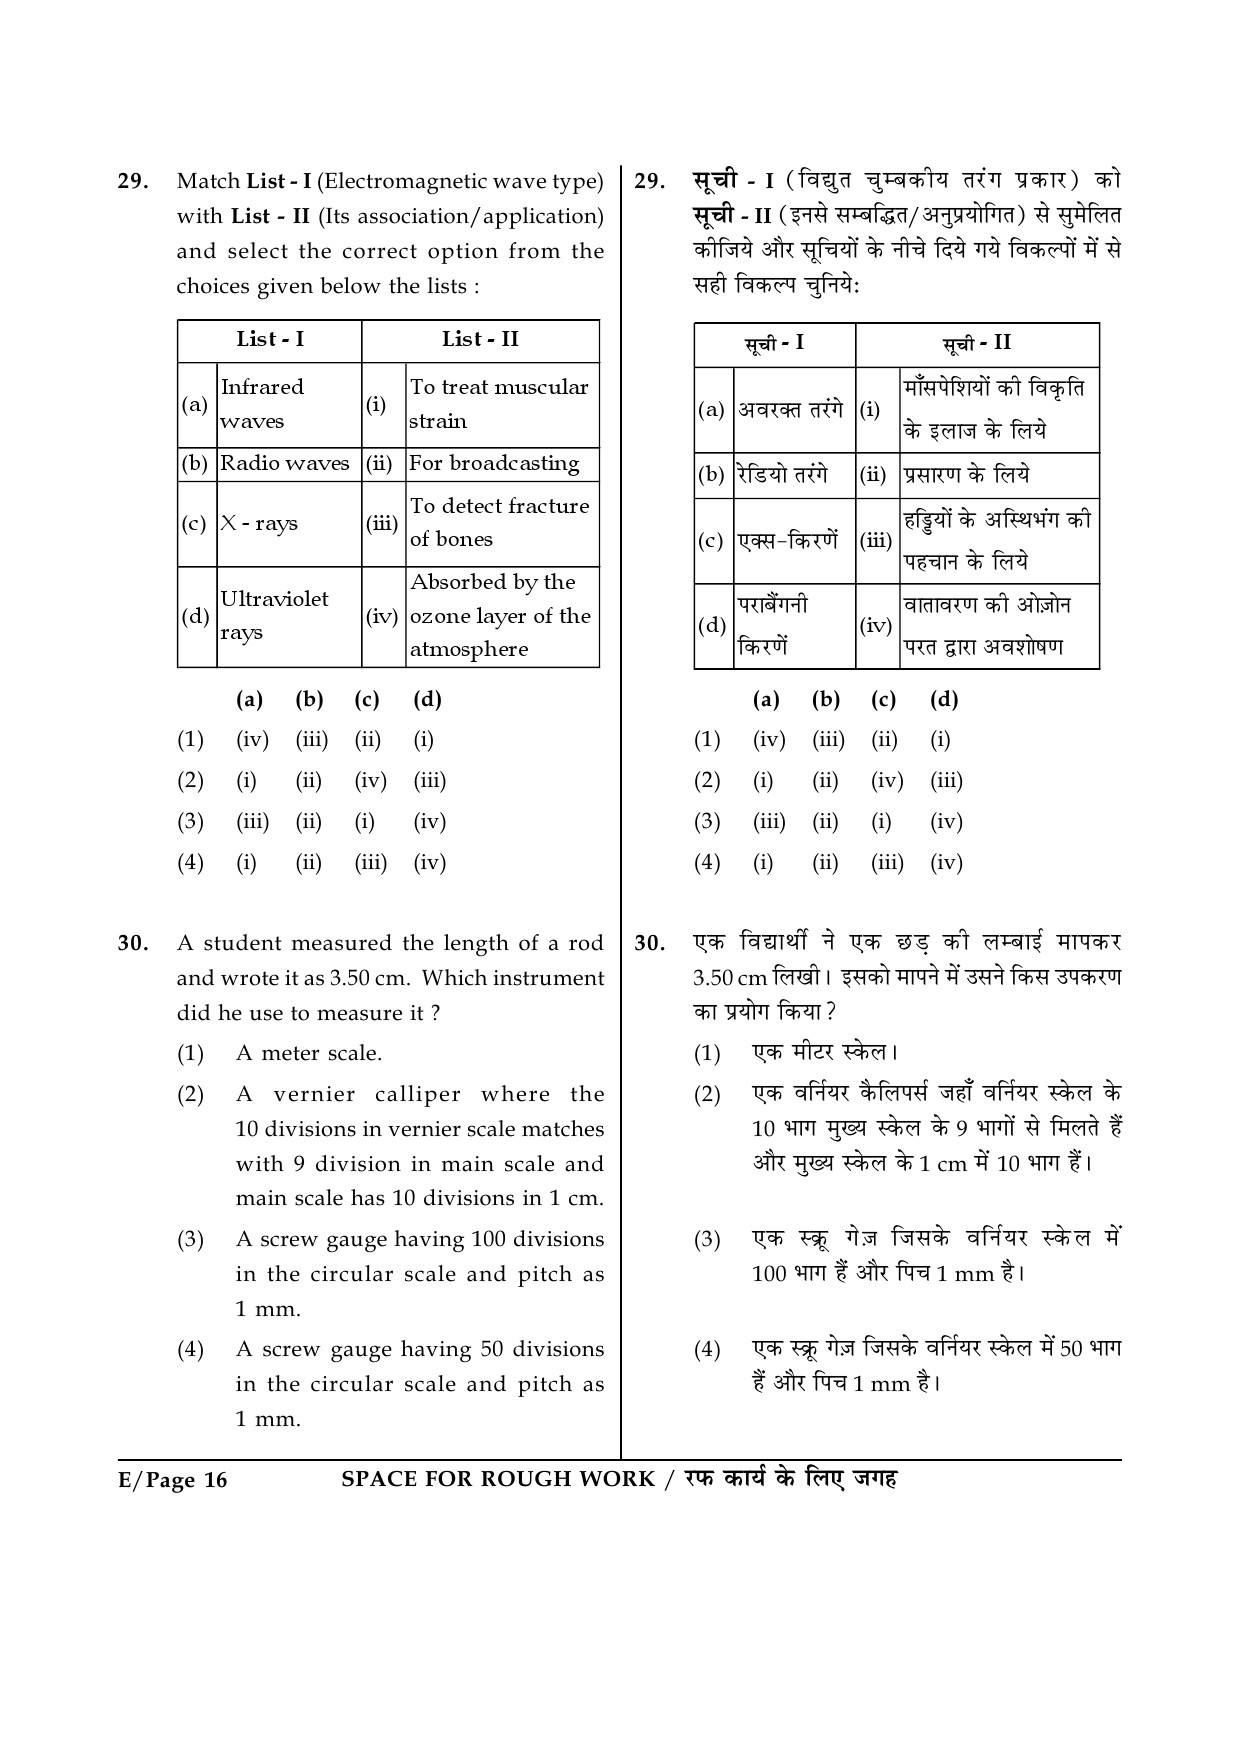 JEE Main Exam Question Paper 2014 Booklet E 16